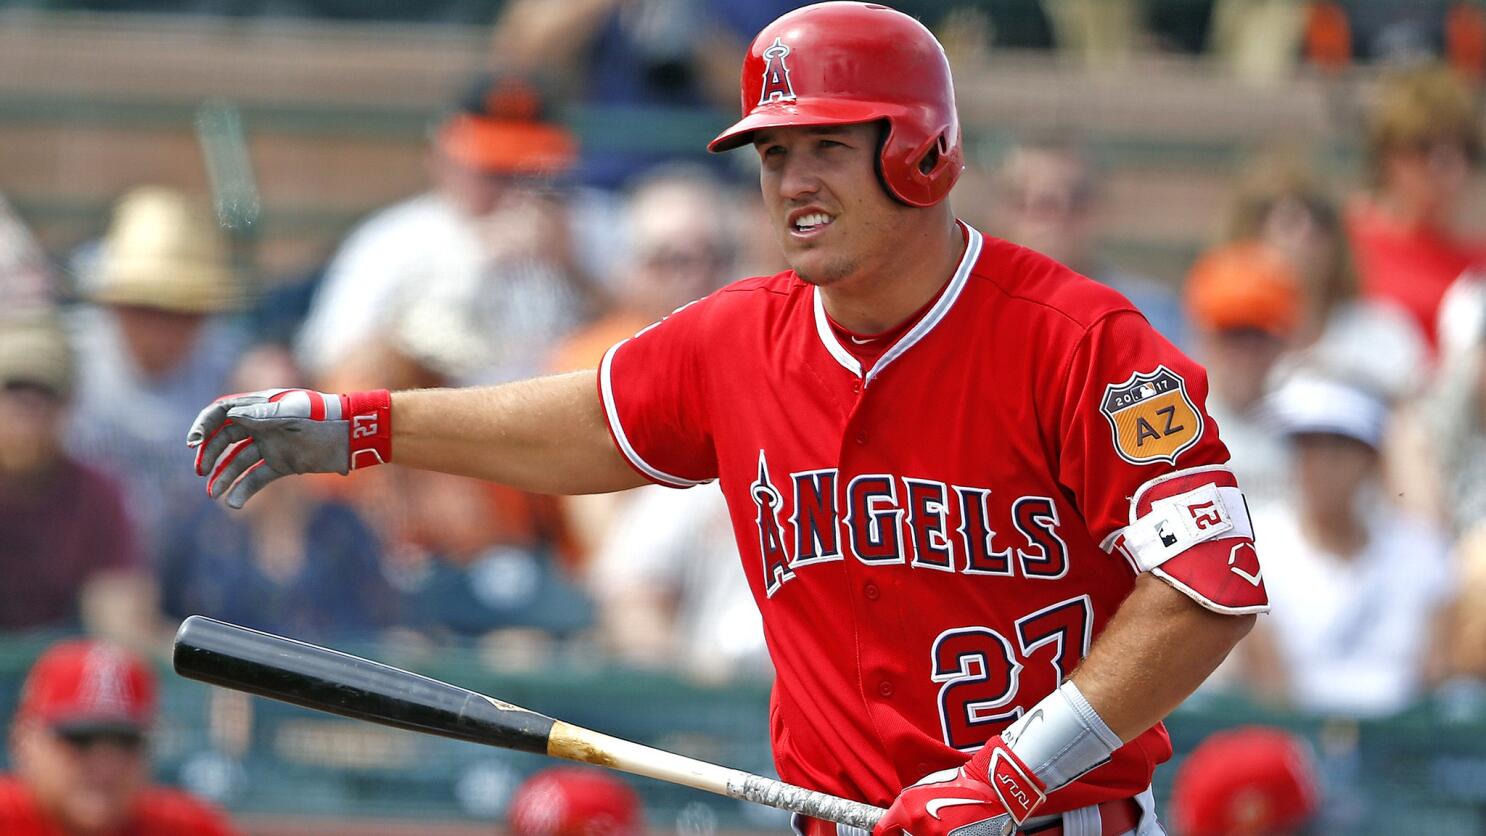 Long Island Native To Be Youngest Catcher On LA Angels Opening Day